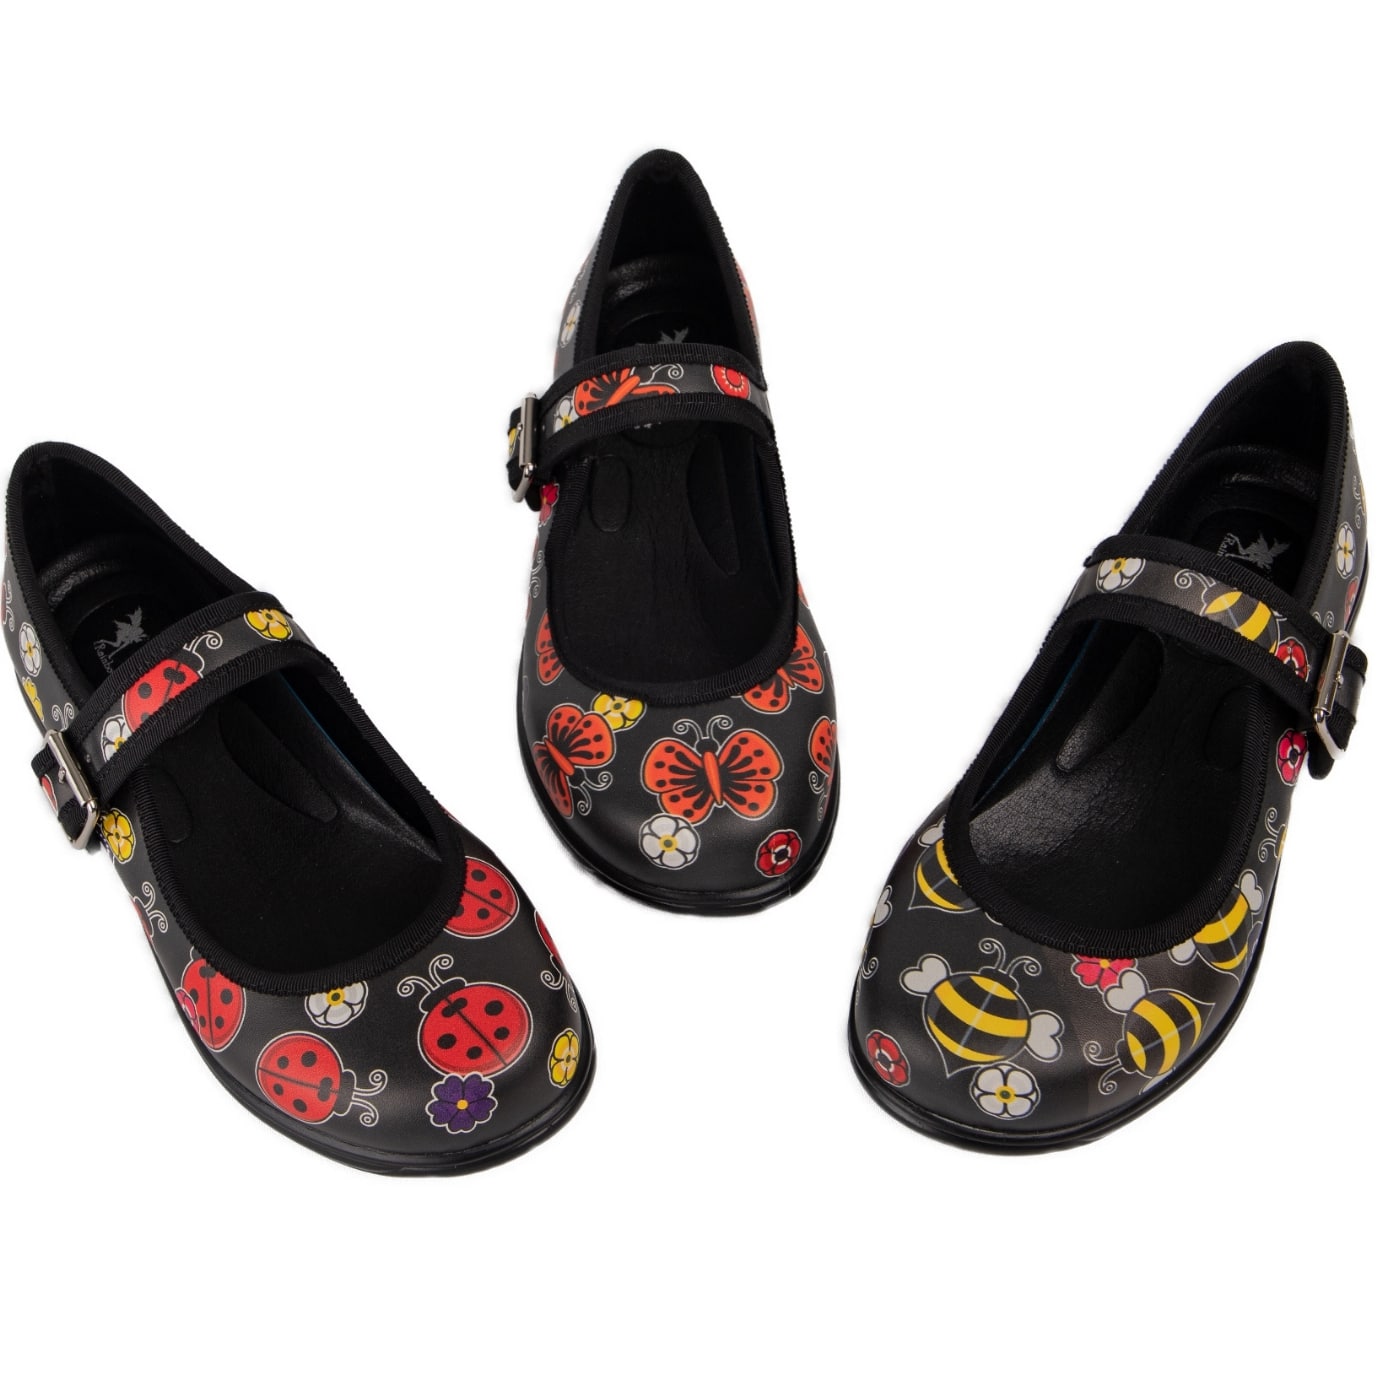 In The Garden Mary Janes by RainbowsAndFairies.com.au (Bees - Ladybug - Butterfly - Mismtached Shoes - Pair & Spare - 3 Shoes - Cute) - SKU: FW_MARYJ_INGARD_ORG - Pic-01